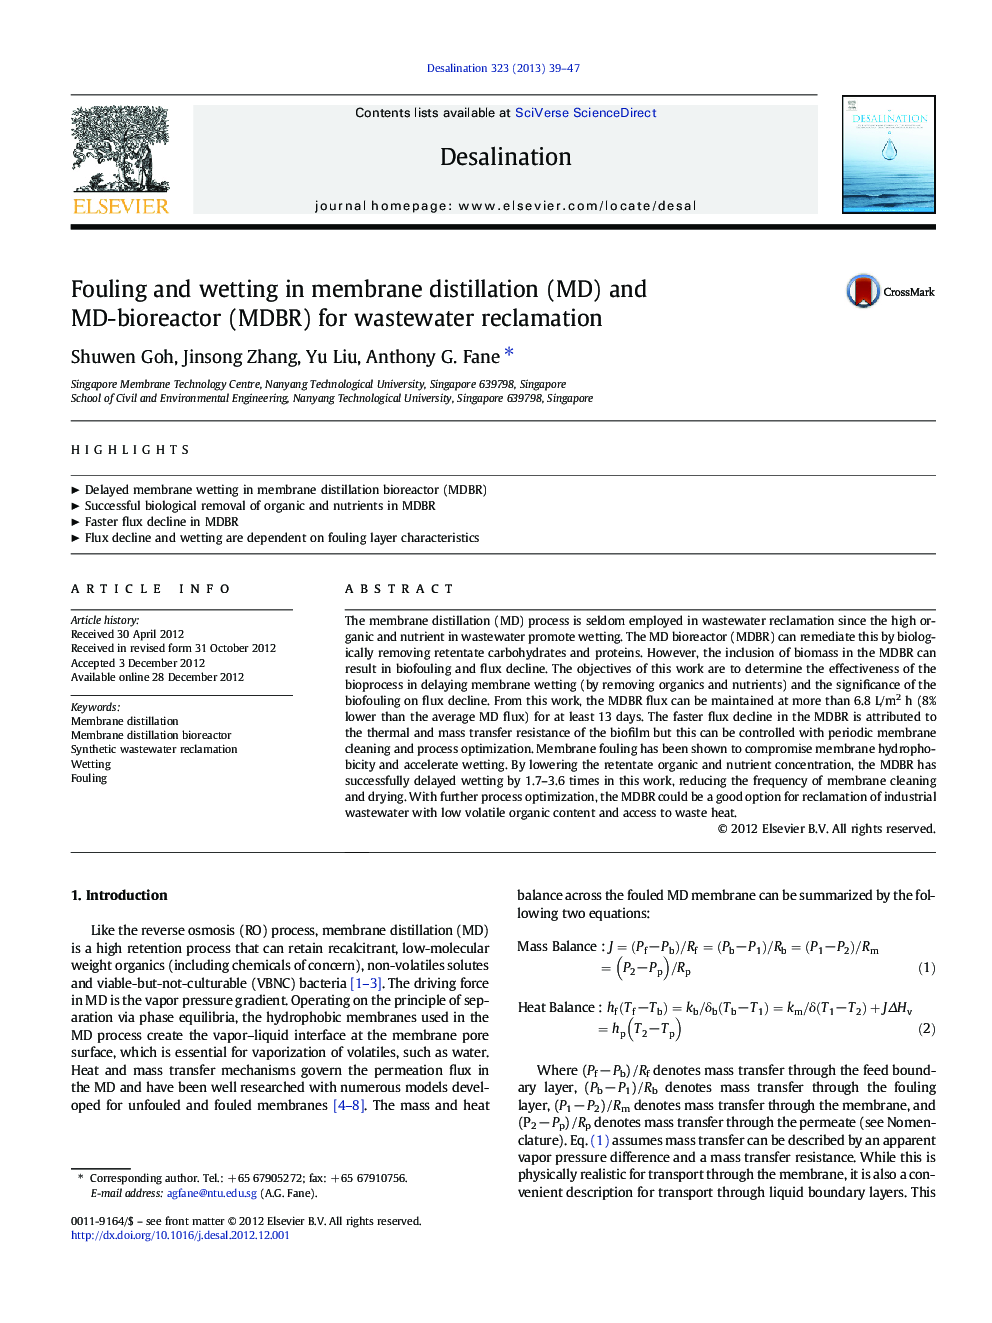 Fouling and wetting in membrane distillation (MD) and MD-bioreactor (MDBR) for wastewater reclamation